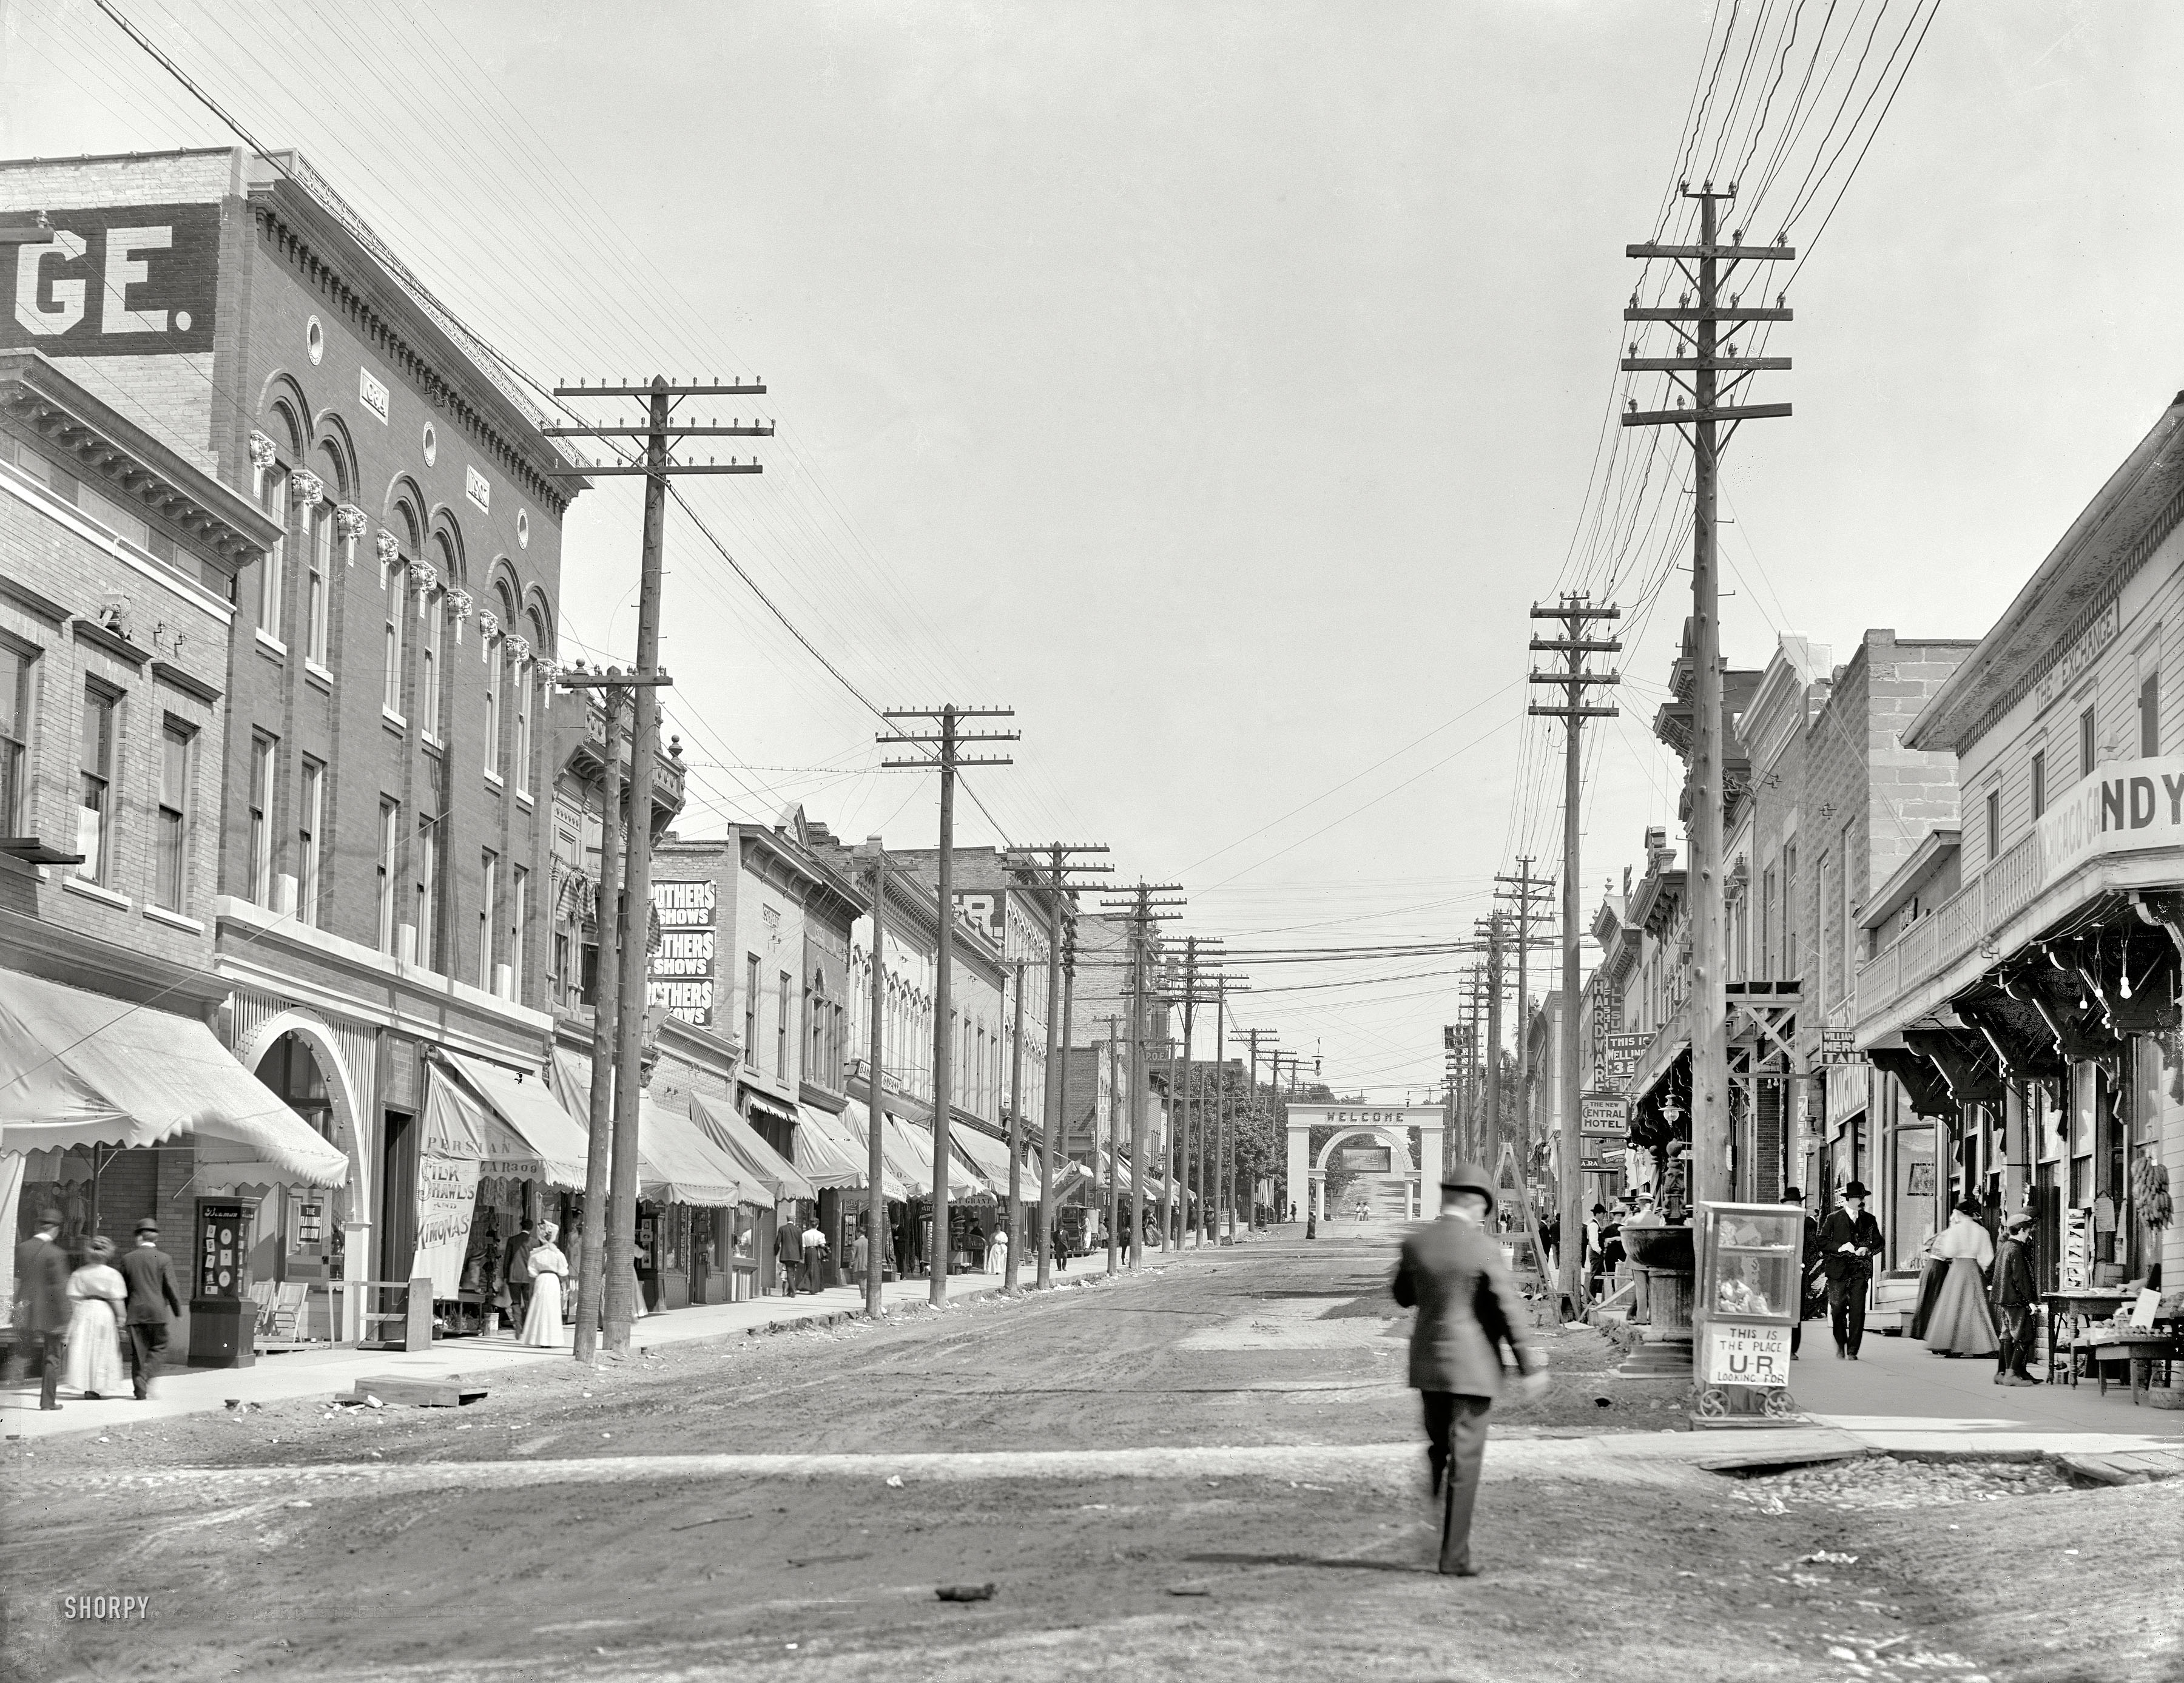 Circa 1908. "Lake Street, Petoskey, Michigan." A bustling hub of commerce offering silk shawls, "kimonas" and "the place U-R looking for." As well as a nice arch. 8x10 inch glass negative, Detroit Publishing Company. View full size.